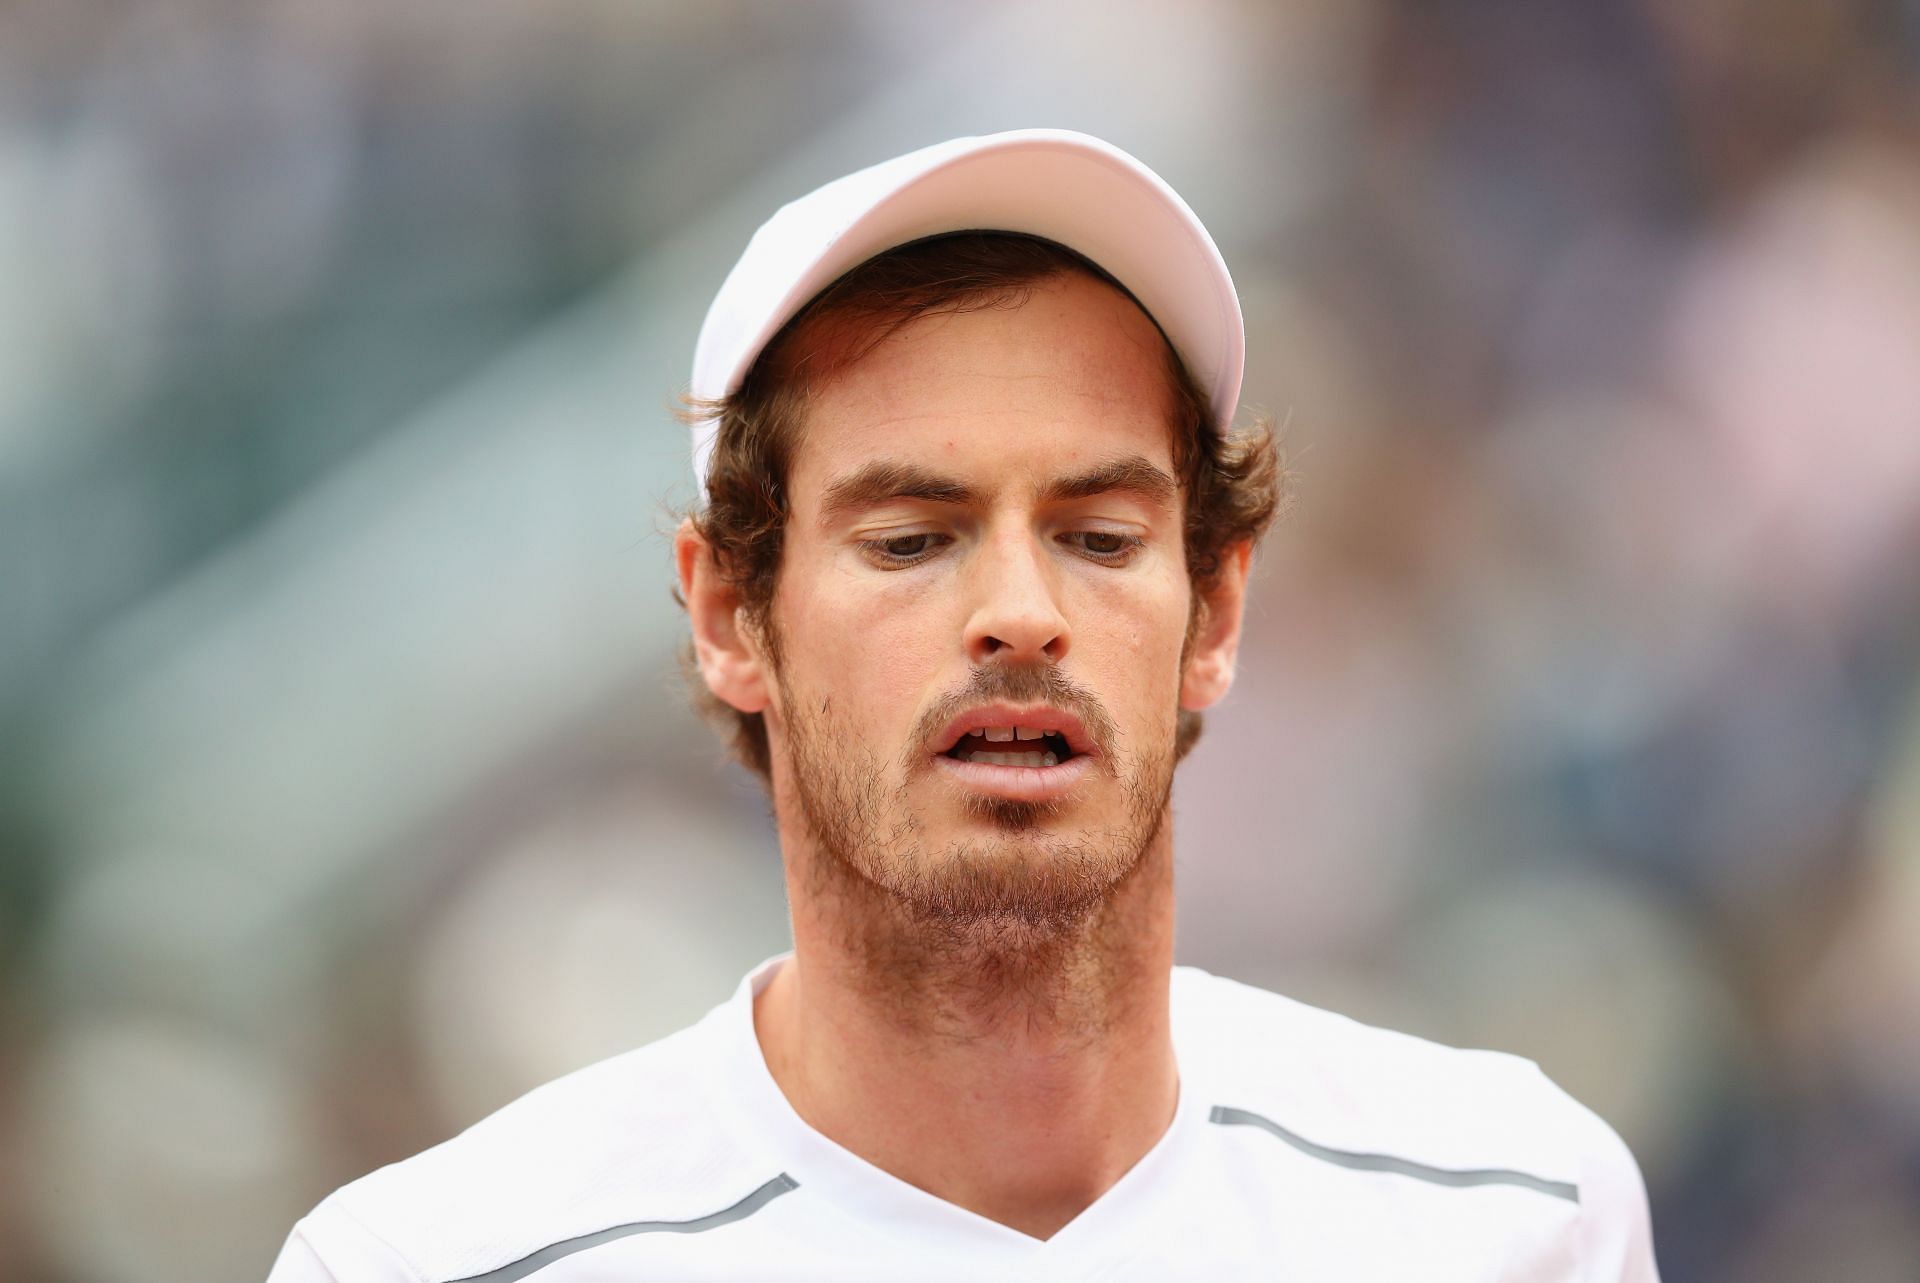 Andy Murray lost in the 2016 French Open final